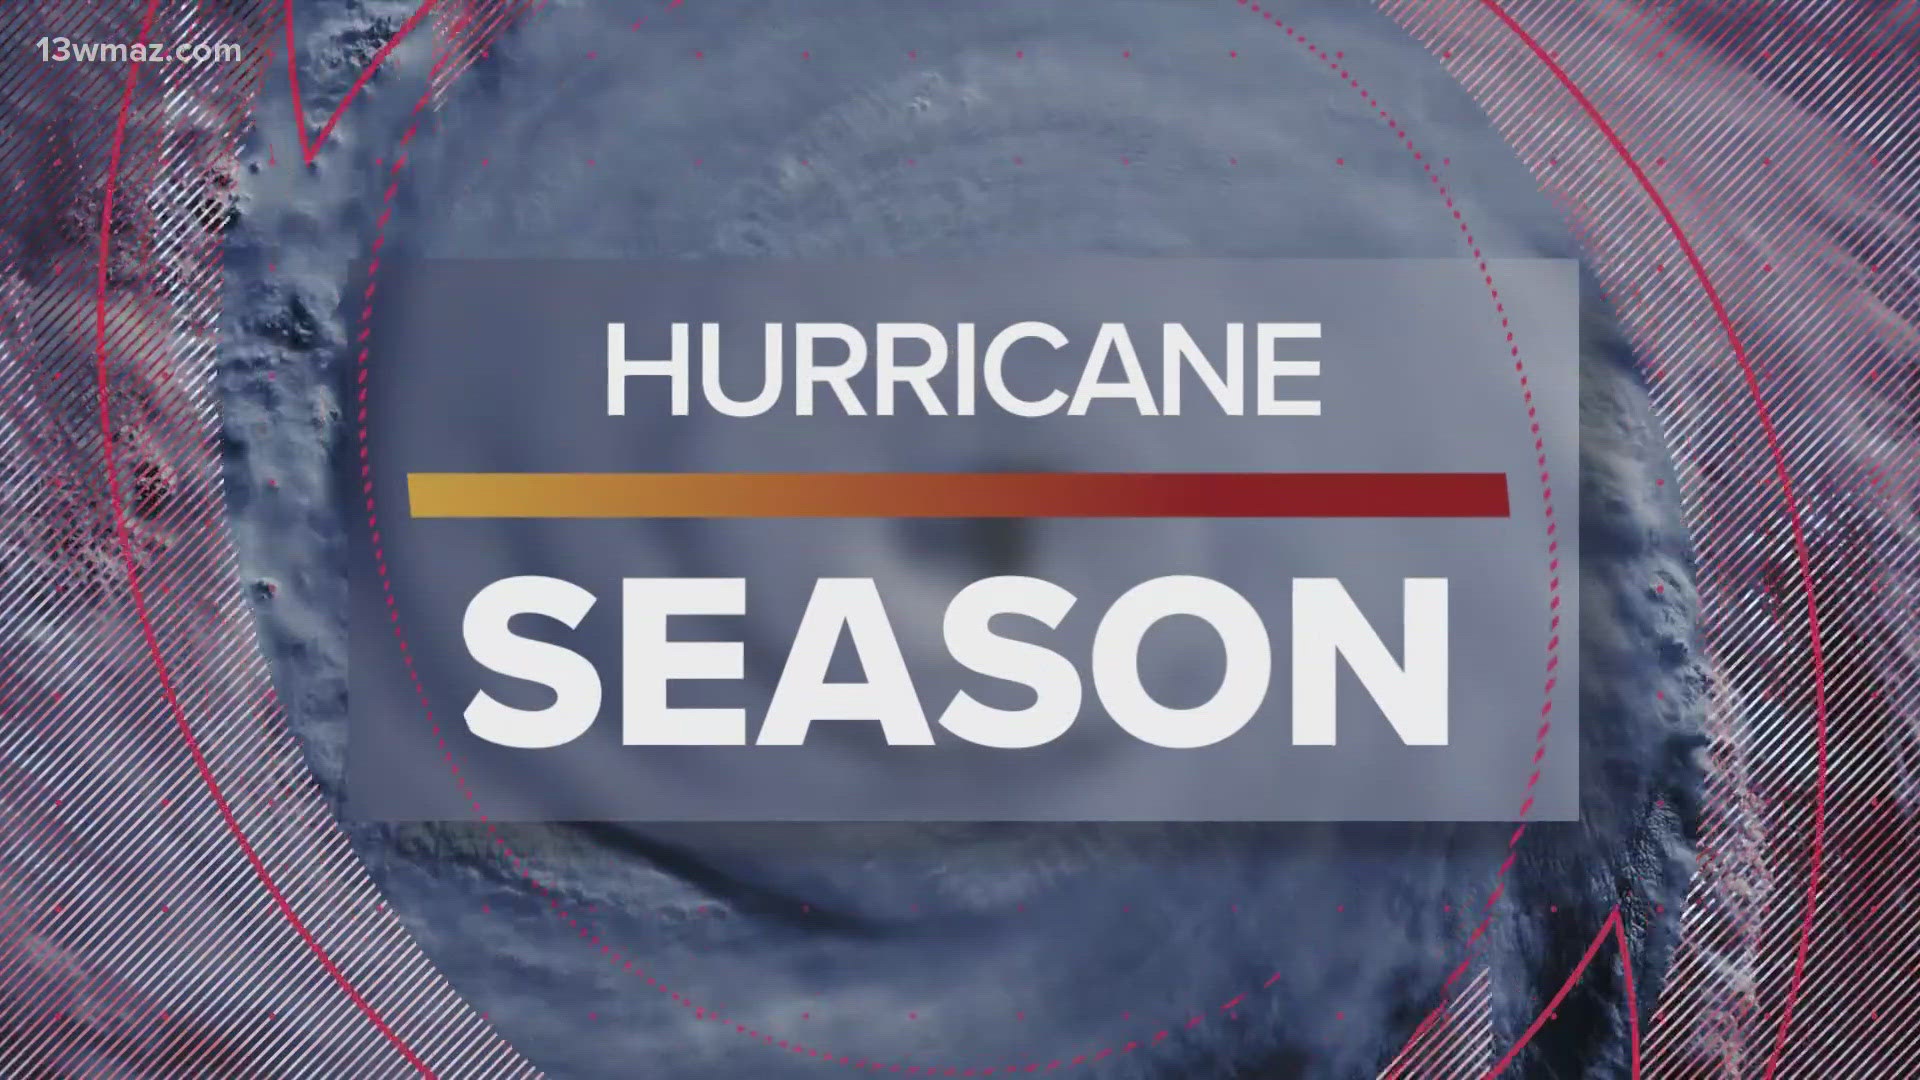 The National Oceanic and Atmospheric Administration predicts the hurricane season from June 1 to Nov. 30 is likely to be well above average.